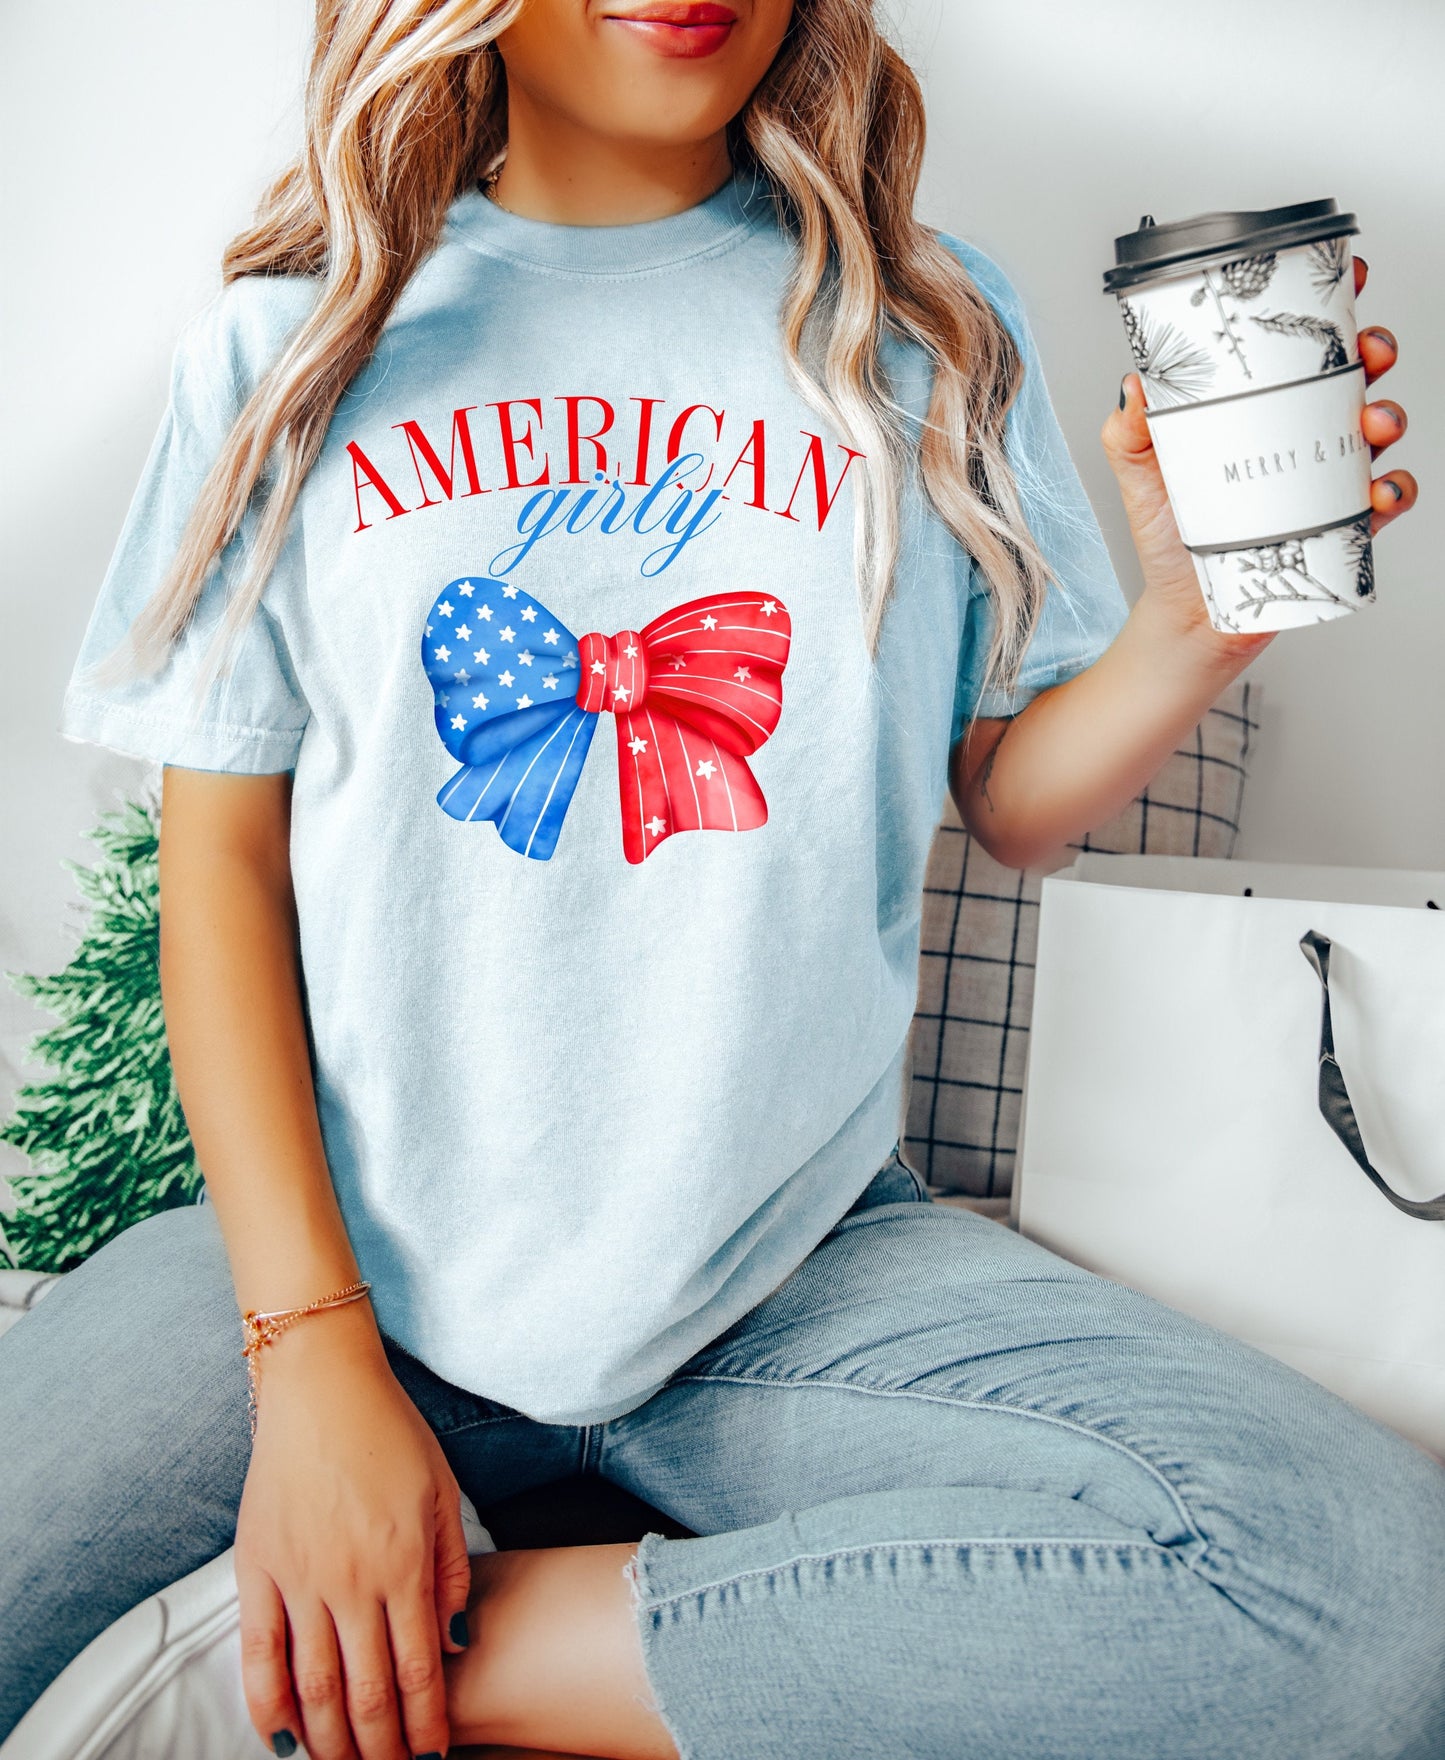 July 4th Shirt, Coquette 4th of July Shirt, USA Shirt, Retro 4th of July Shirt, Comfort Colors Shirt, Summertime Tee, American Girly Big Bow